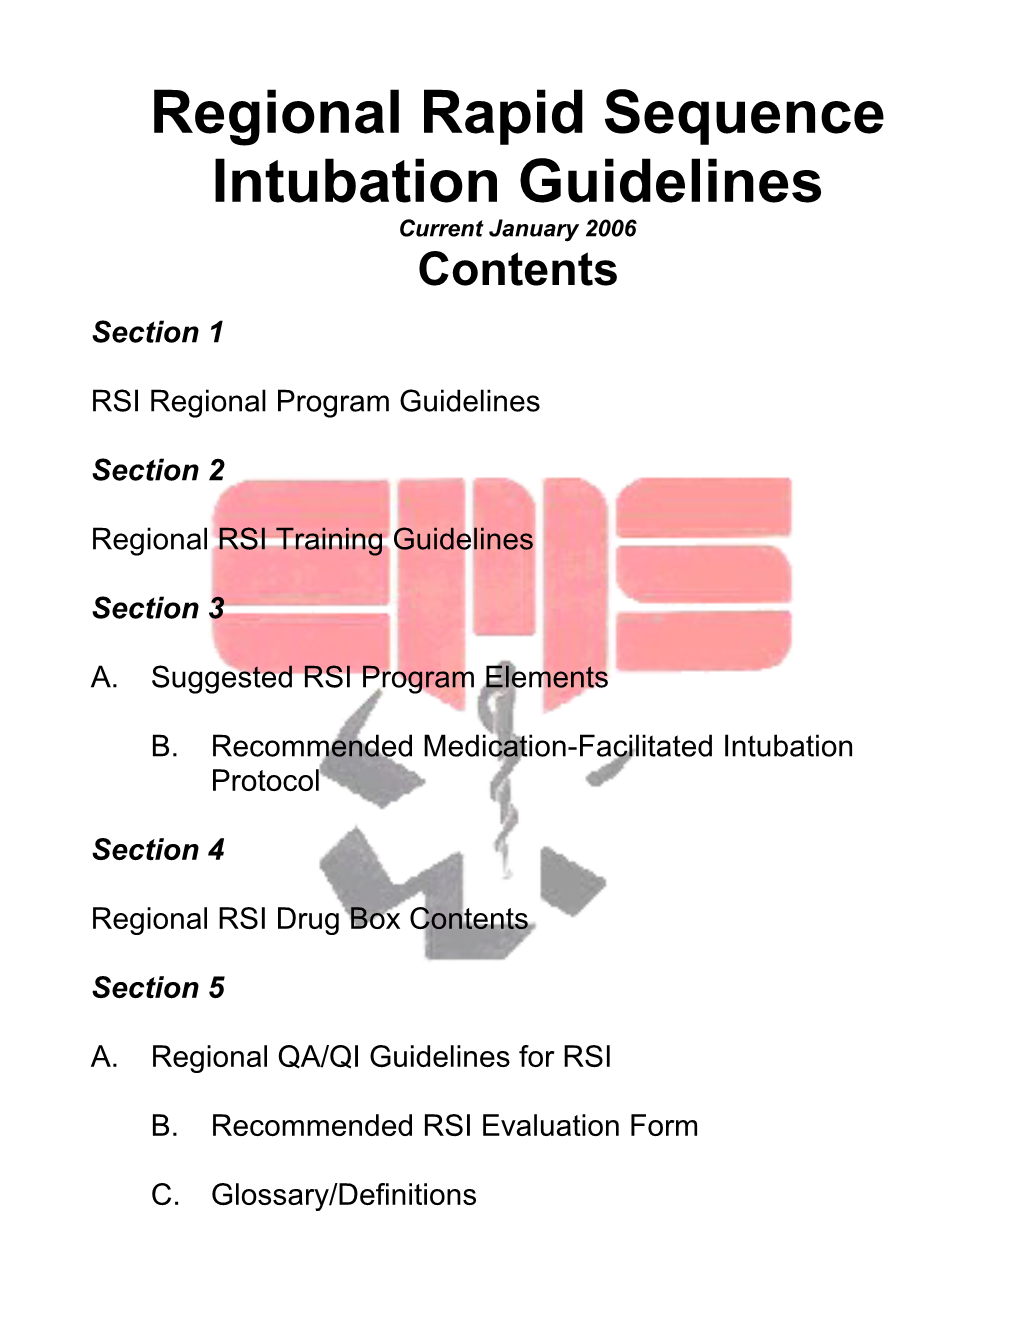 Regional Guidelines and Related Information